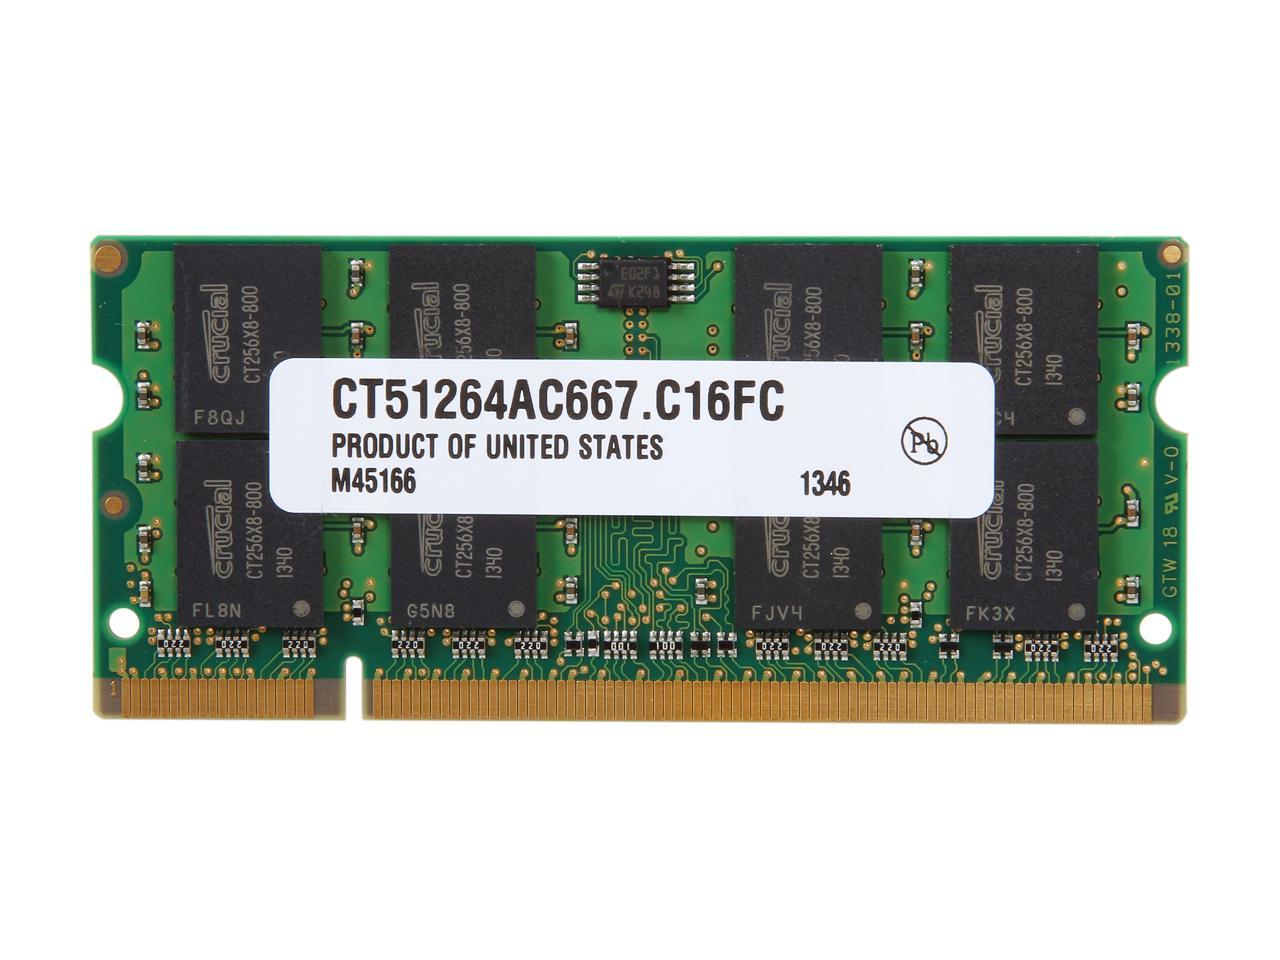 Crucial 4GB 200-Pin DDR2 SO-DIMM DDR2 667 (PC2 5300) Laptop Memory